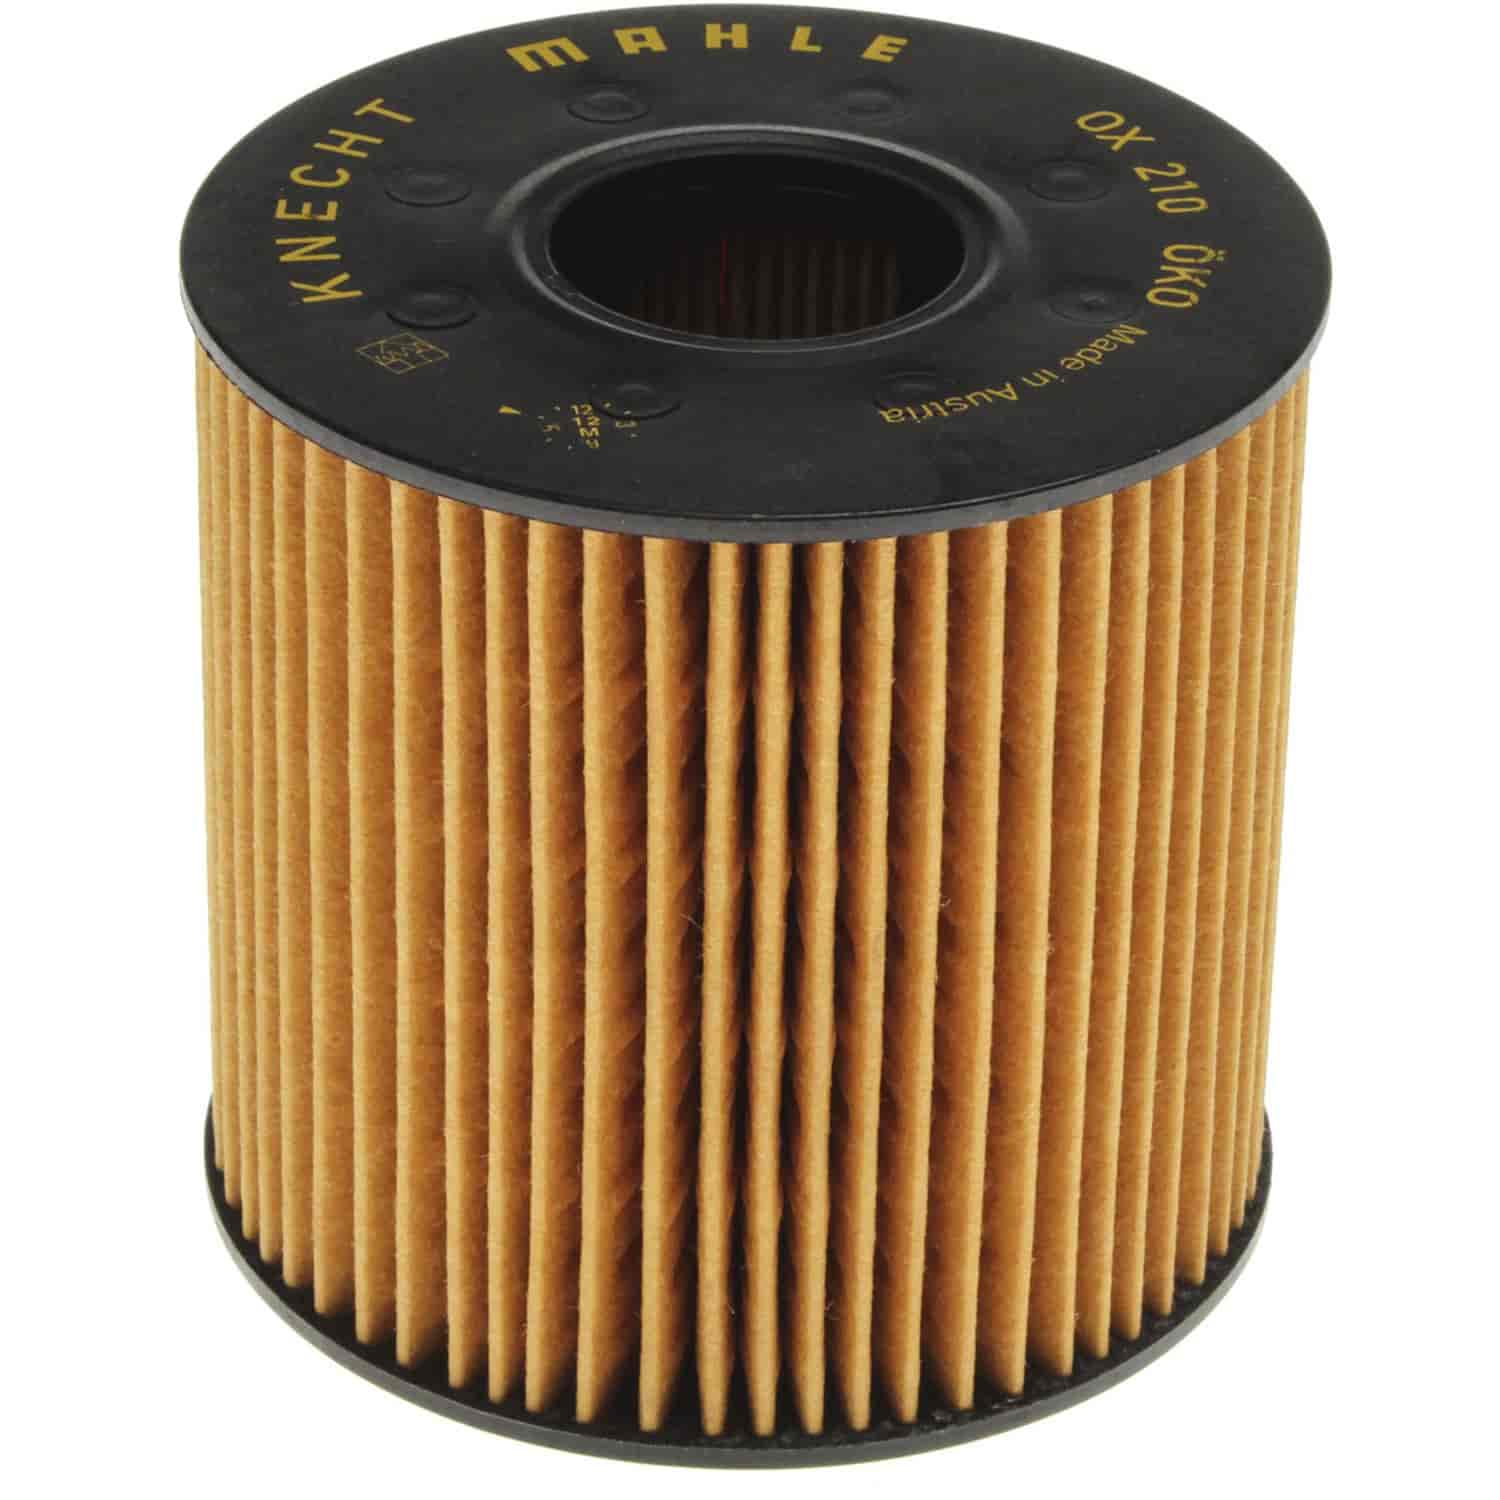 Mahle Oil Filter for Nissan Van Interstar 2.2L and 2.5L DCI 2003->